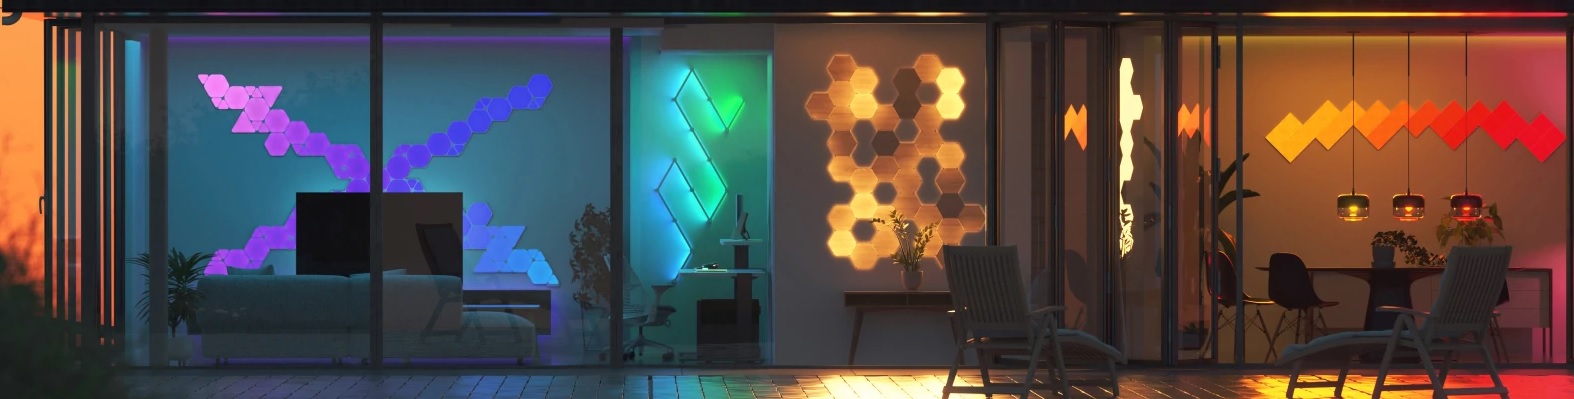 Nanoleaf Designs and Products